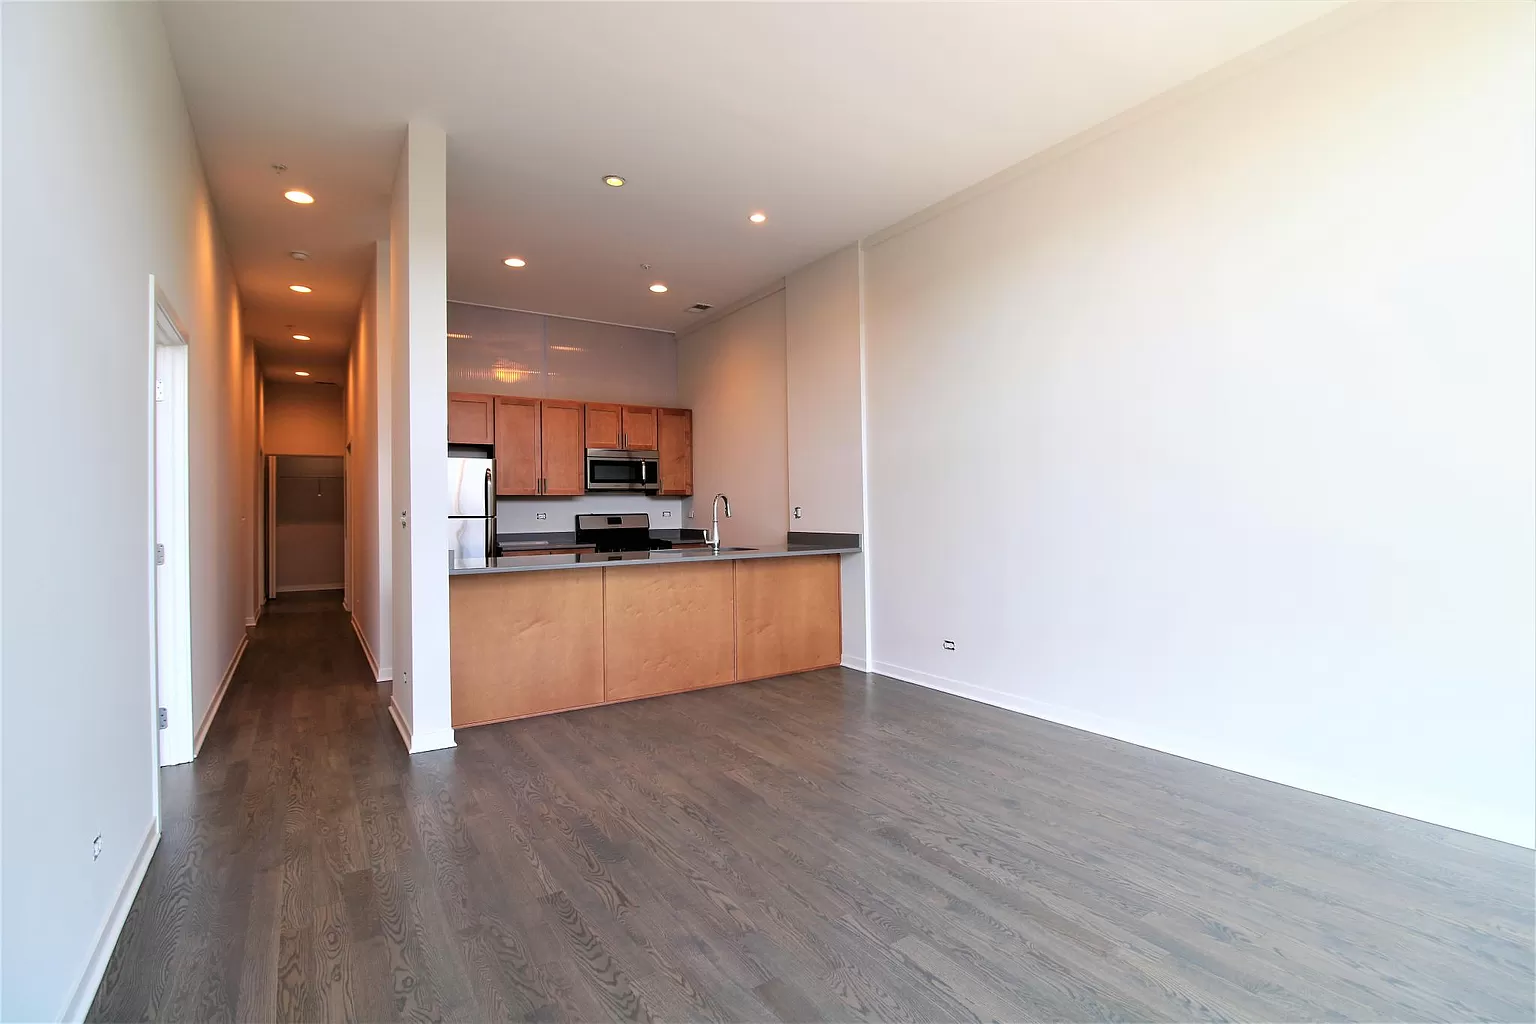 UIC Housing 2.5 Bed 2 bath apartment - Available for lease takeover or looking for a room mate for University of Illinois at Chicago Students in Chicago, IL